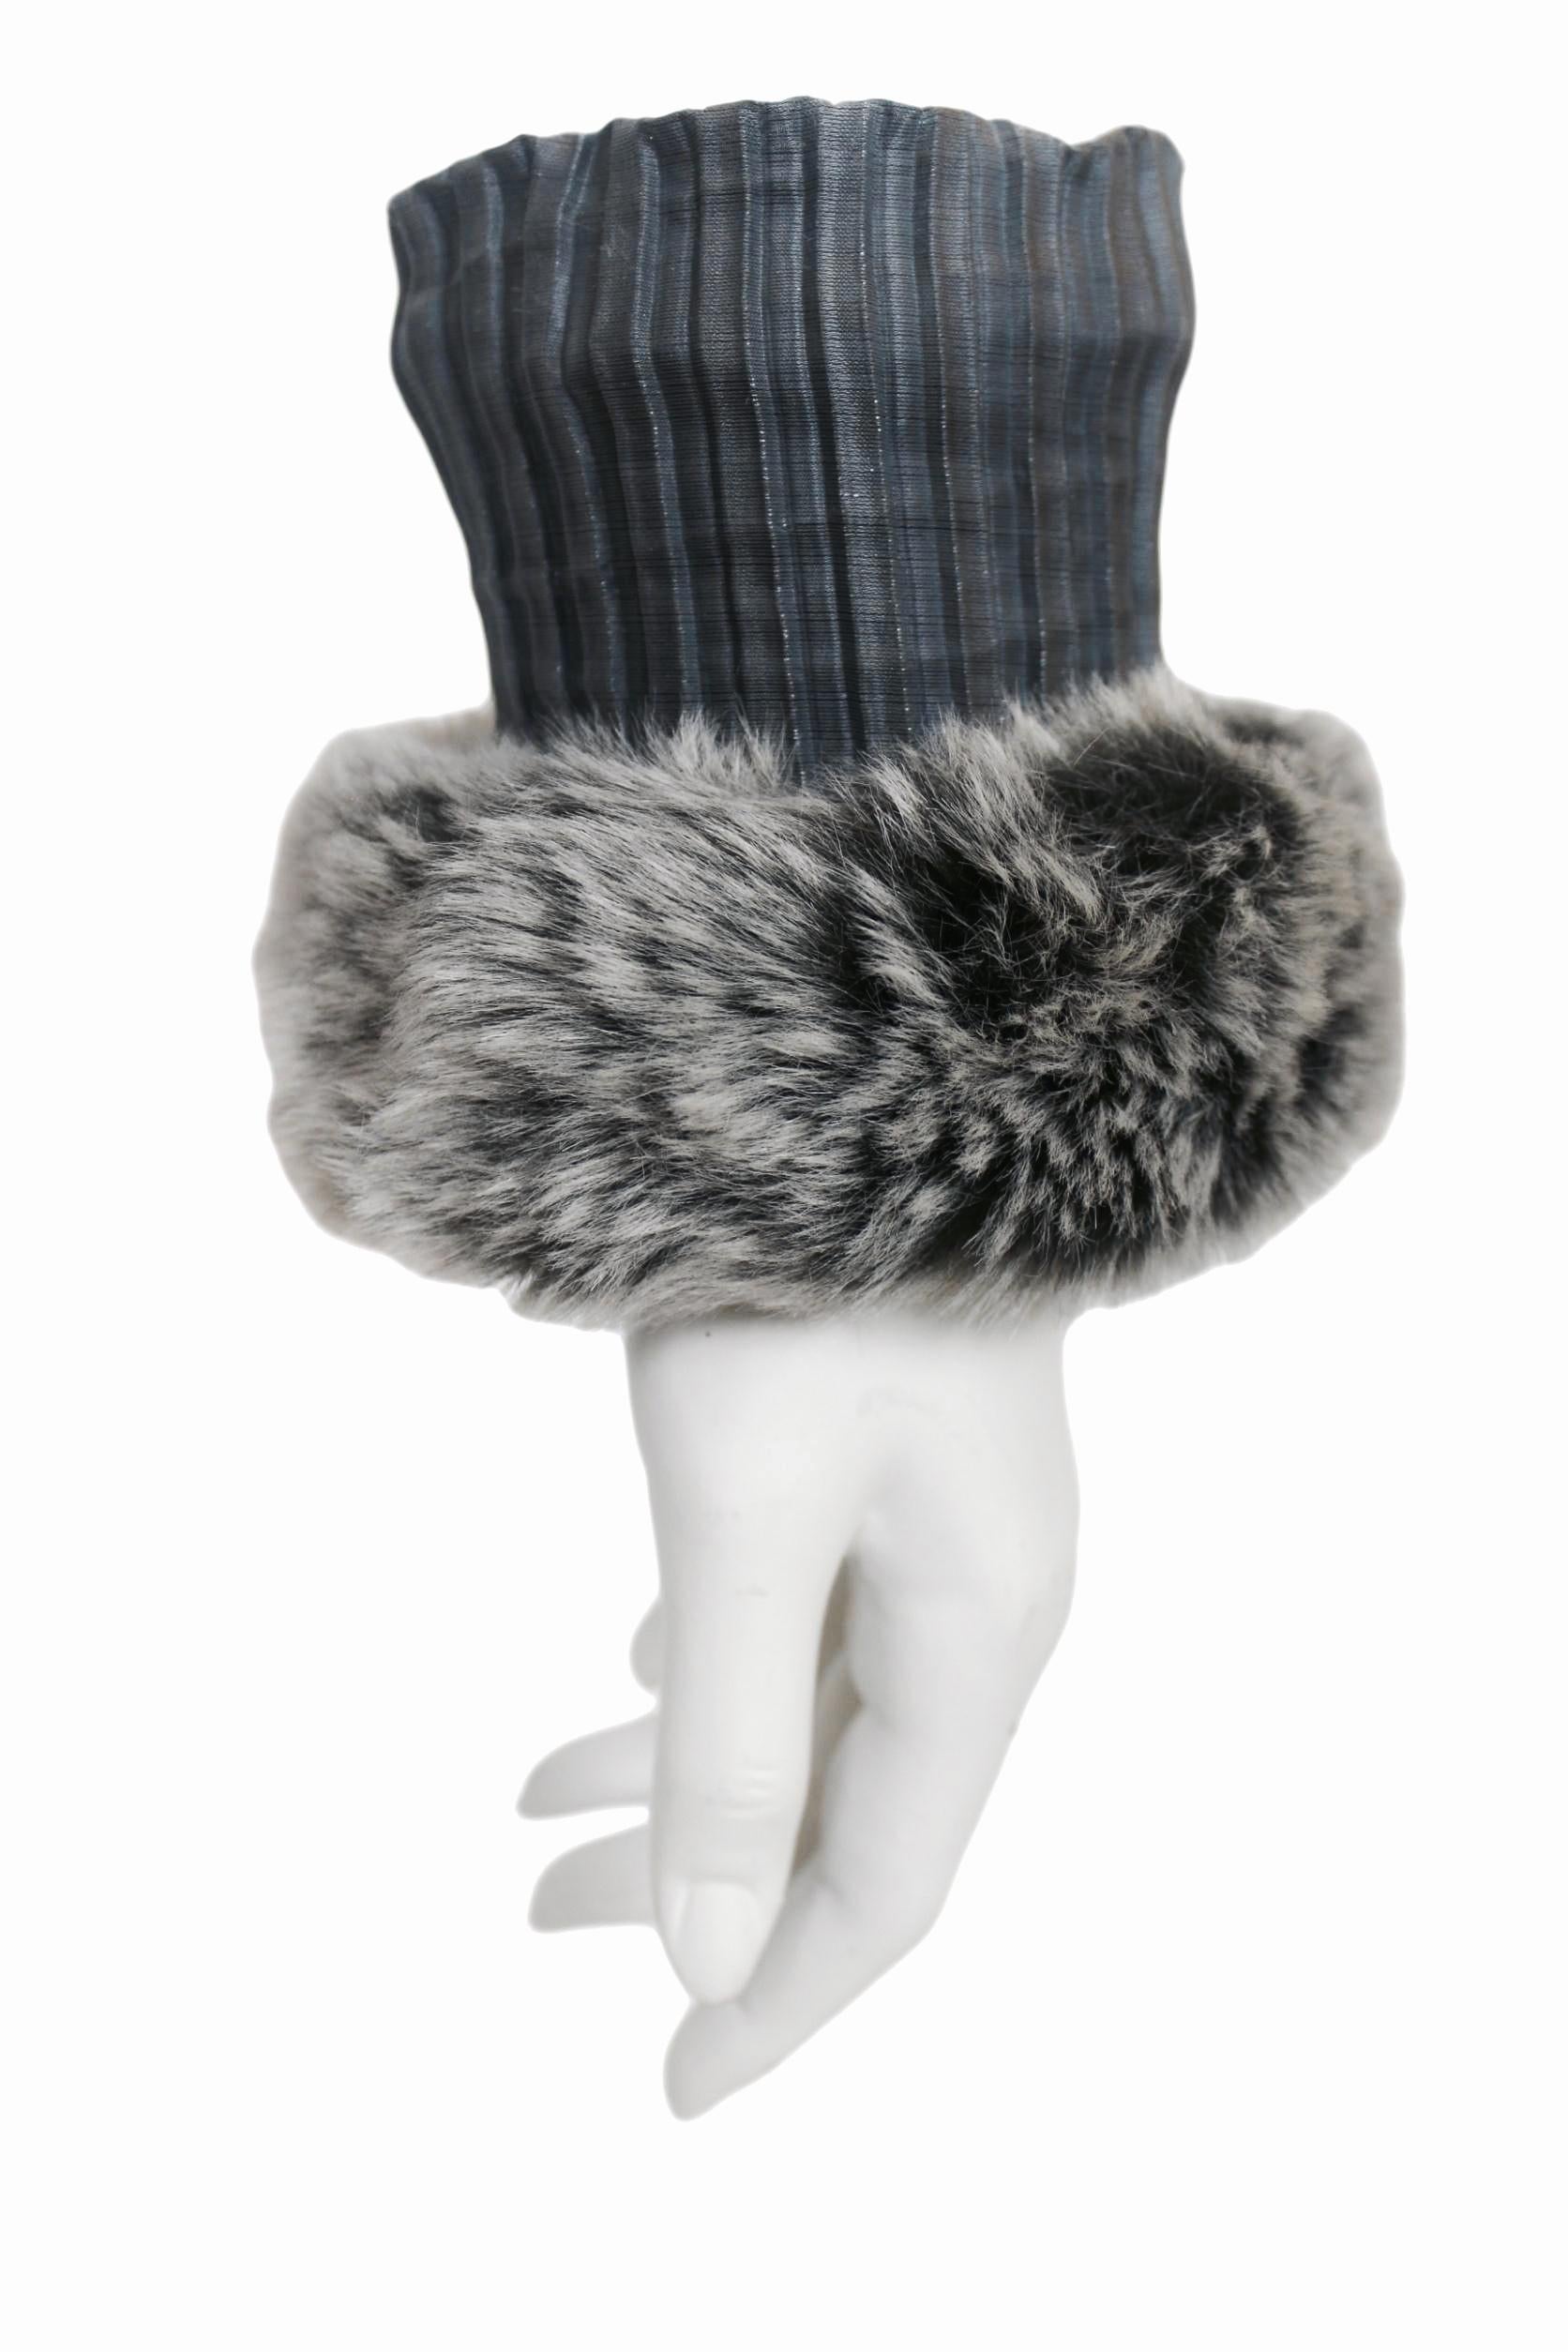 Issey Miyake Faux Fur Pleats Please Cowl and Wrist Cuff Accessories  For Sale 7